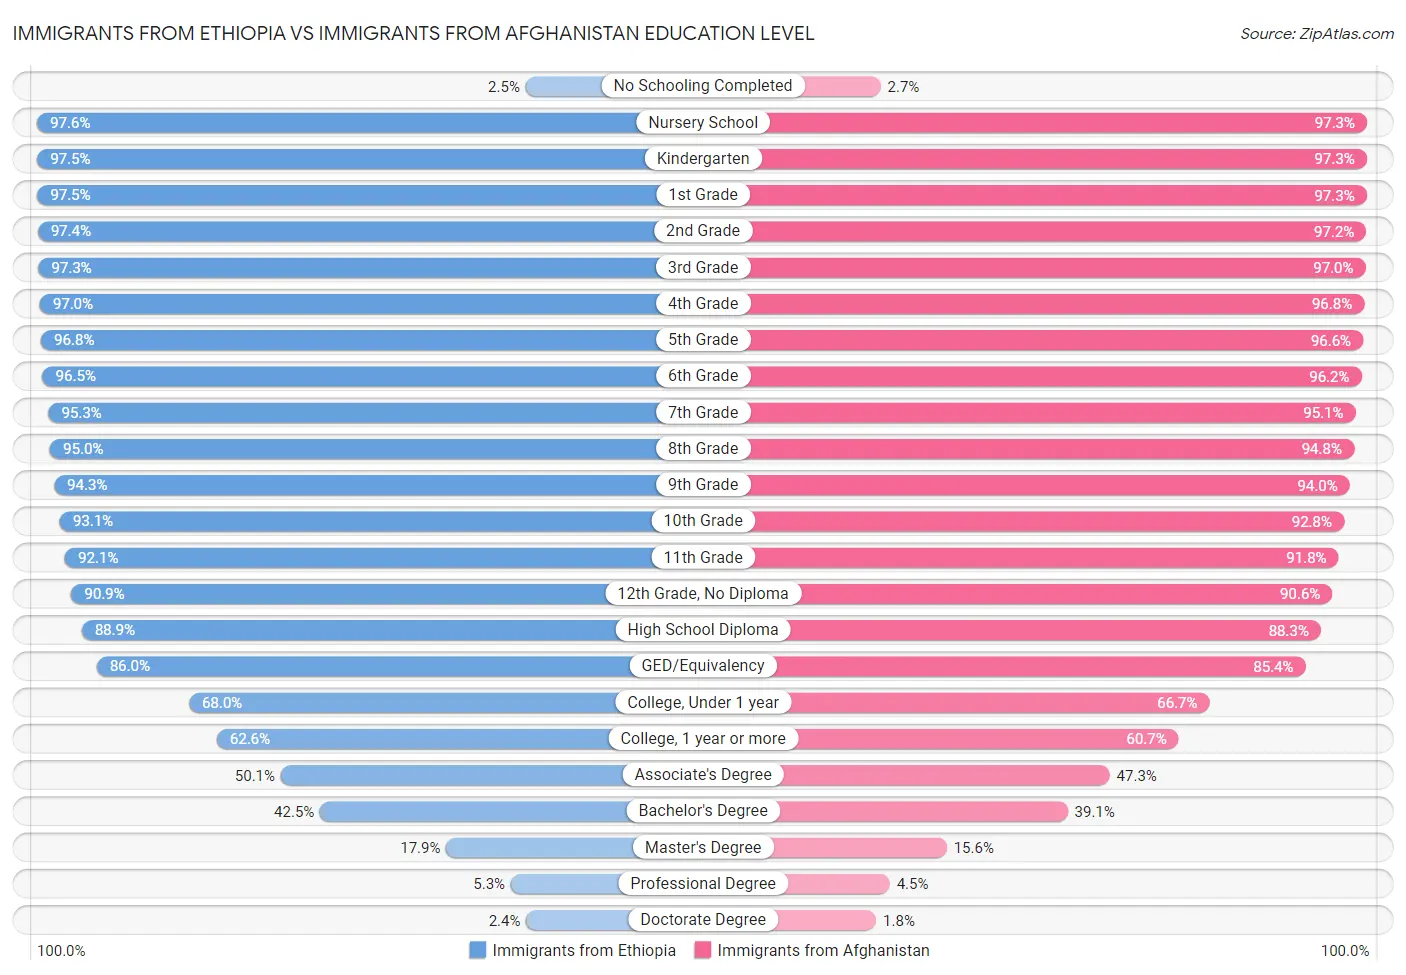 Immigrants from Ethiopia vs Immigrants from Afghanistan Education Level